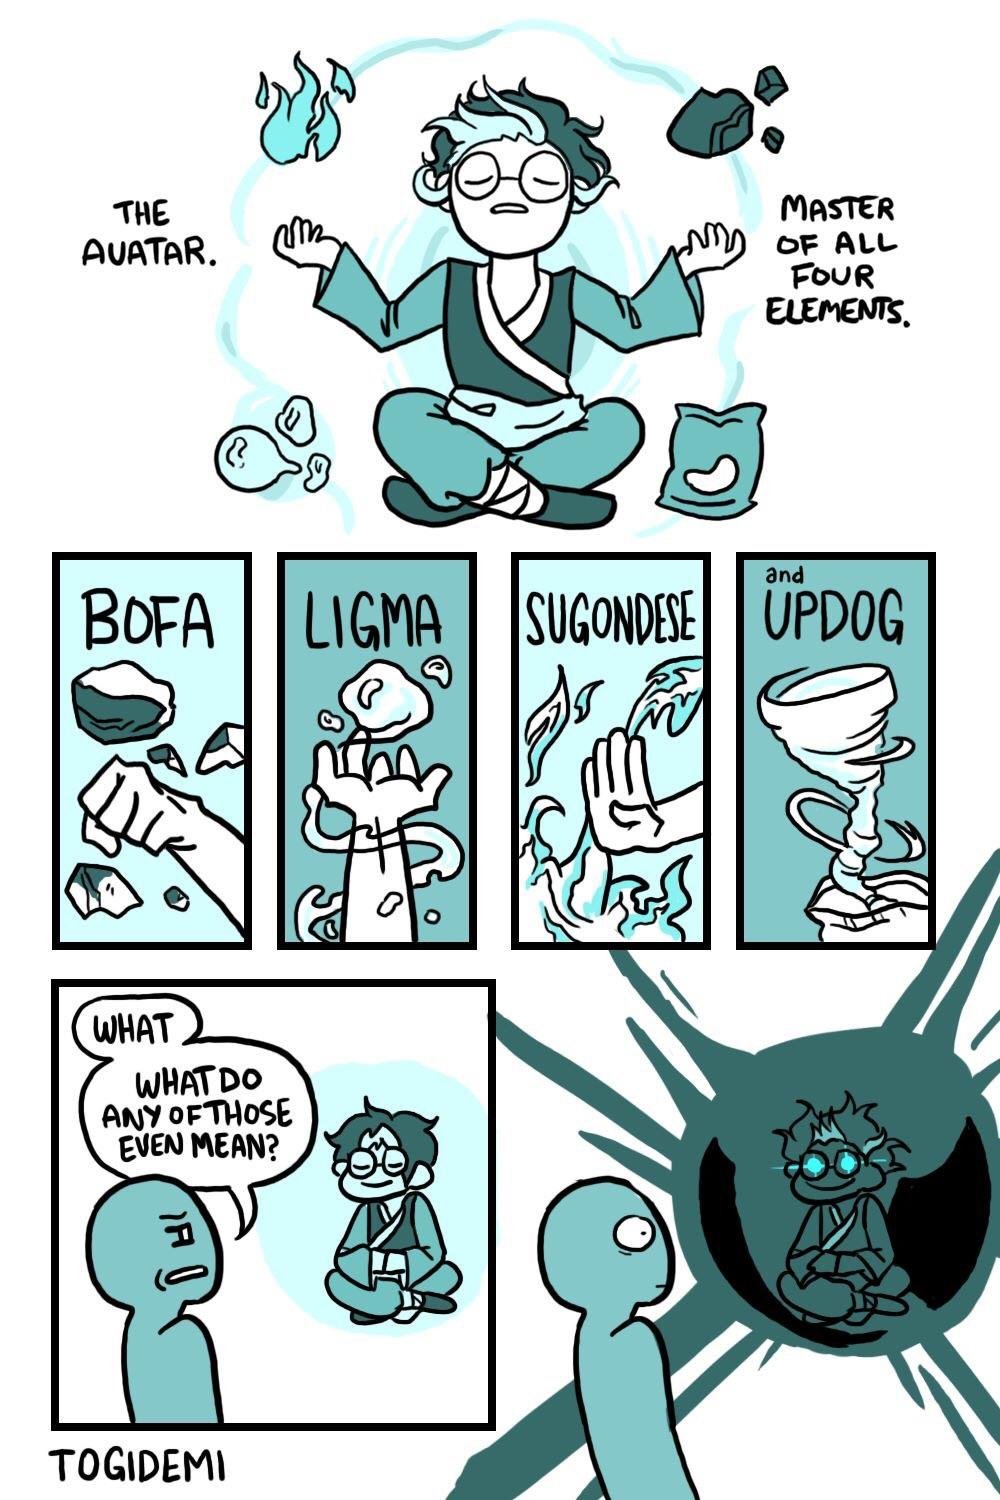 bofa ligma sugondese updog - The Quator. Master Of All Four Elements. and Bofa What What Do Any Of Those Even Mean? Togidemi